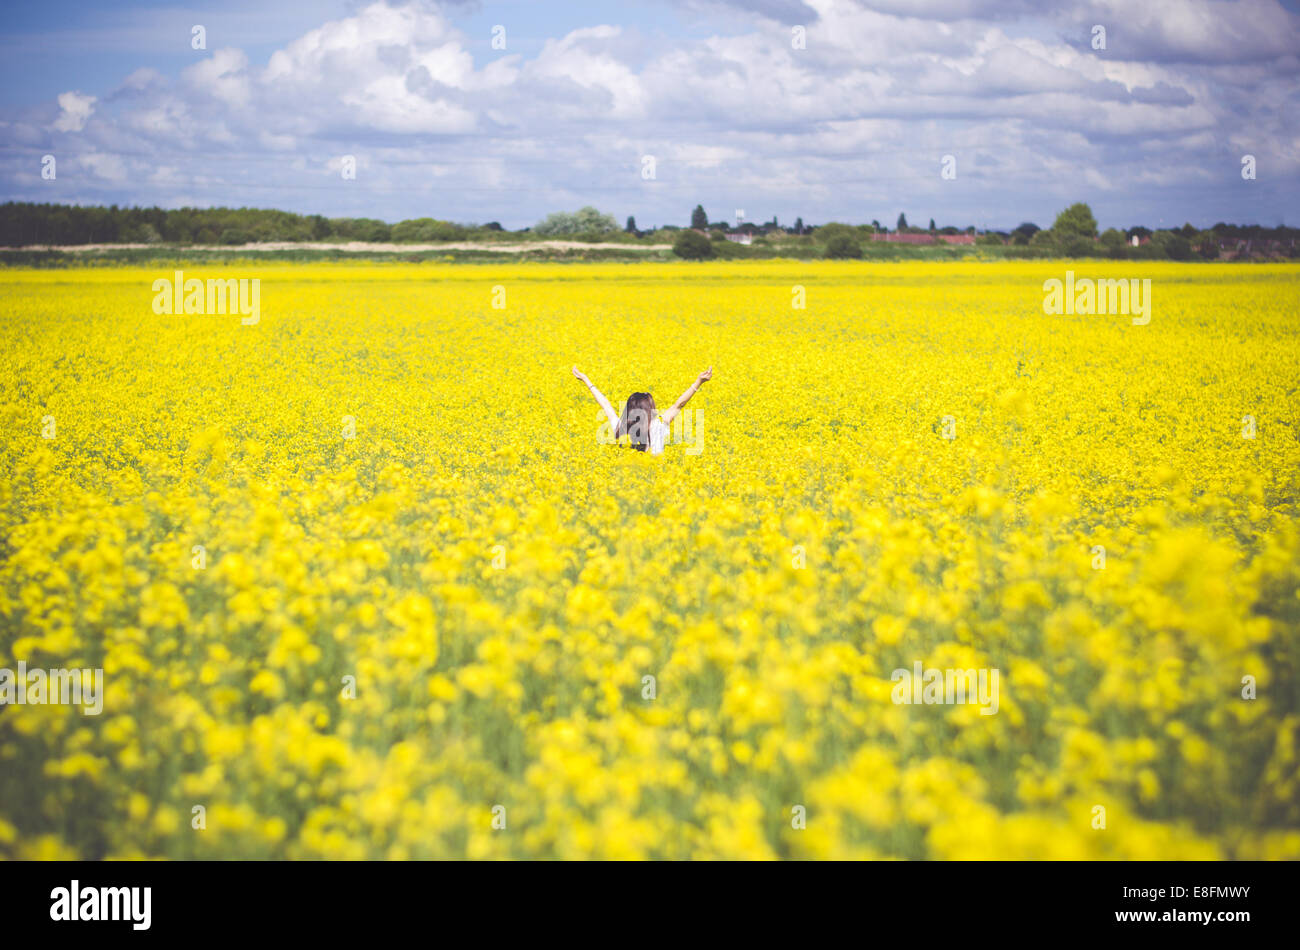 Girl standing in rapeseed field Banque D'Images